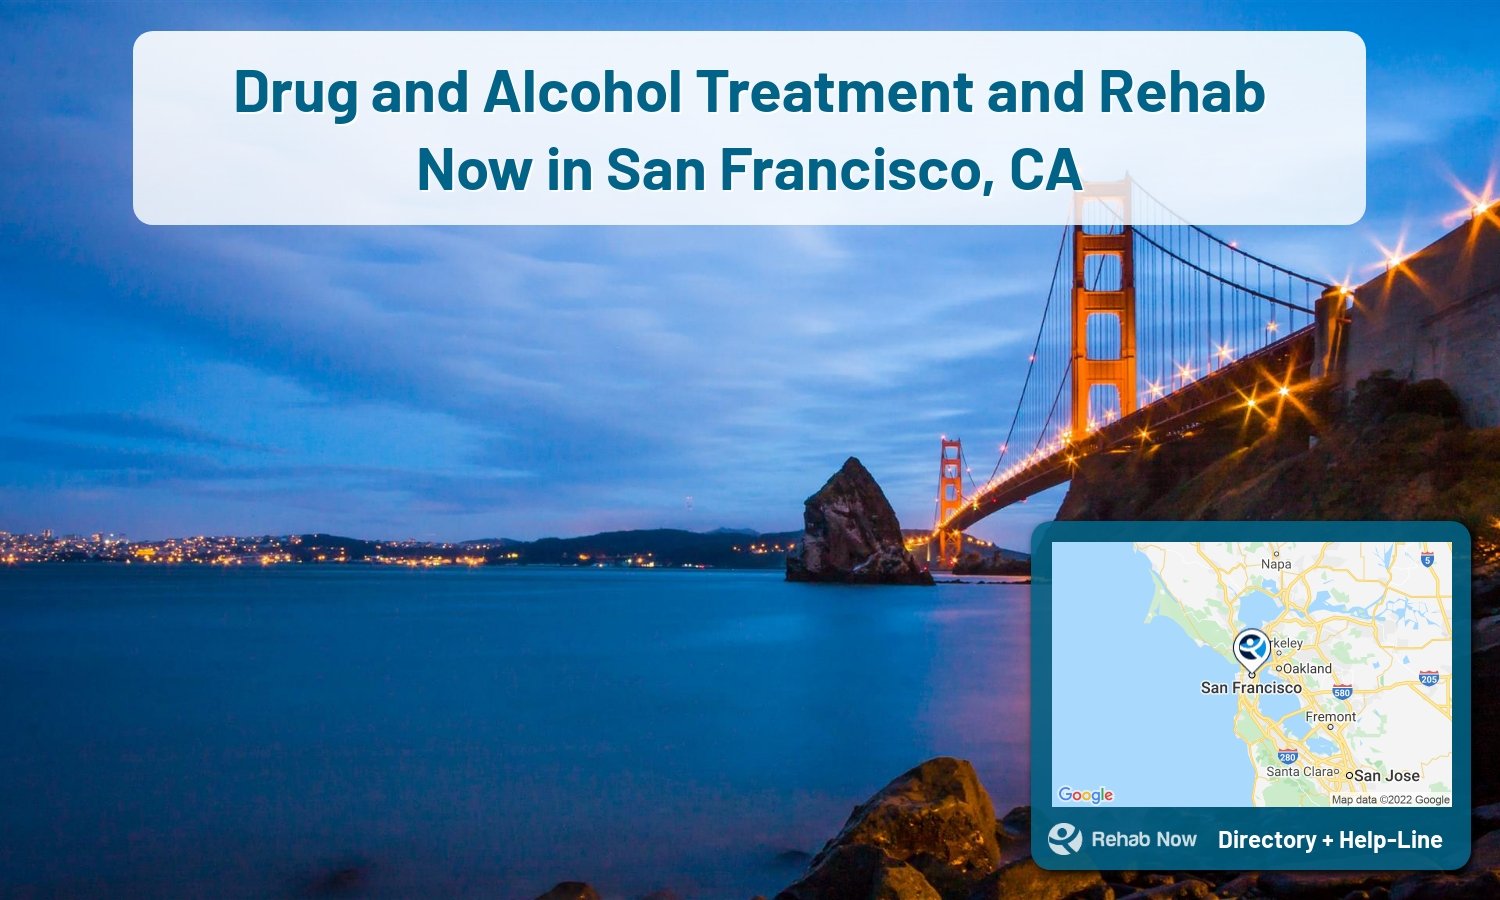 San Francisco, CA Treatment Centers. Find drug rehab in San Francisco, California, or detox and treatment programs. Get the right help now!